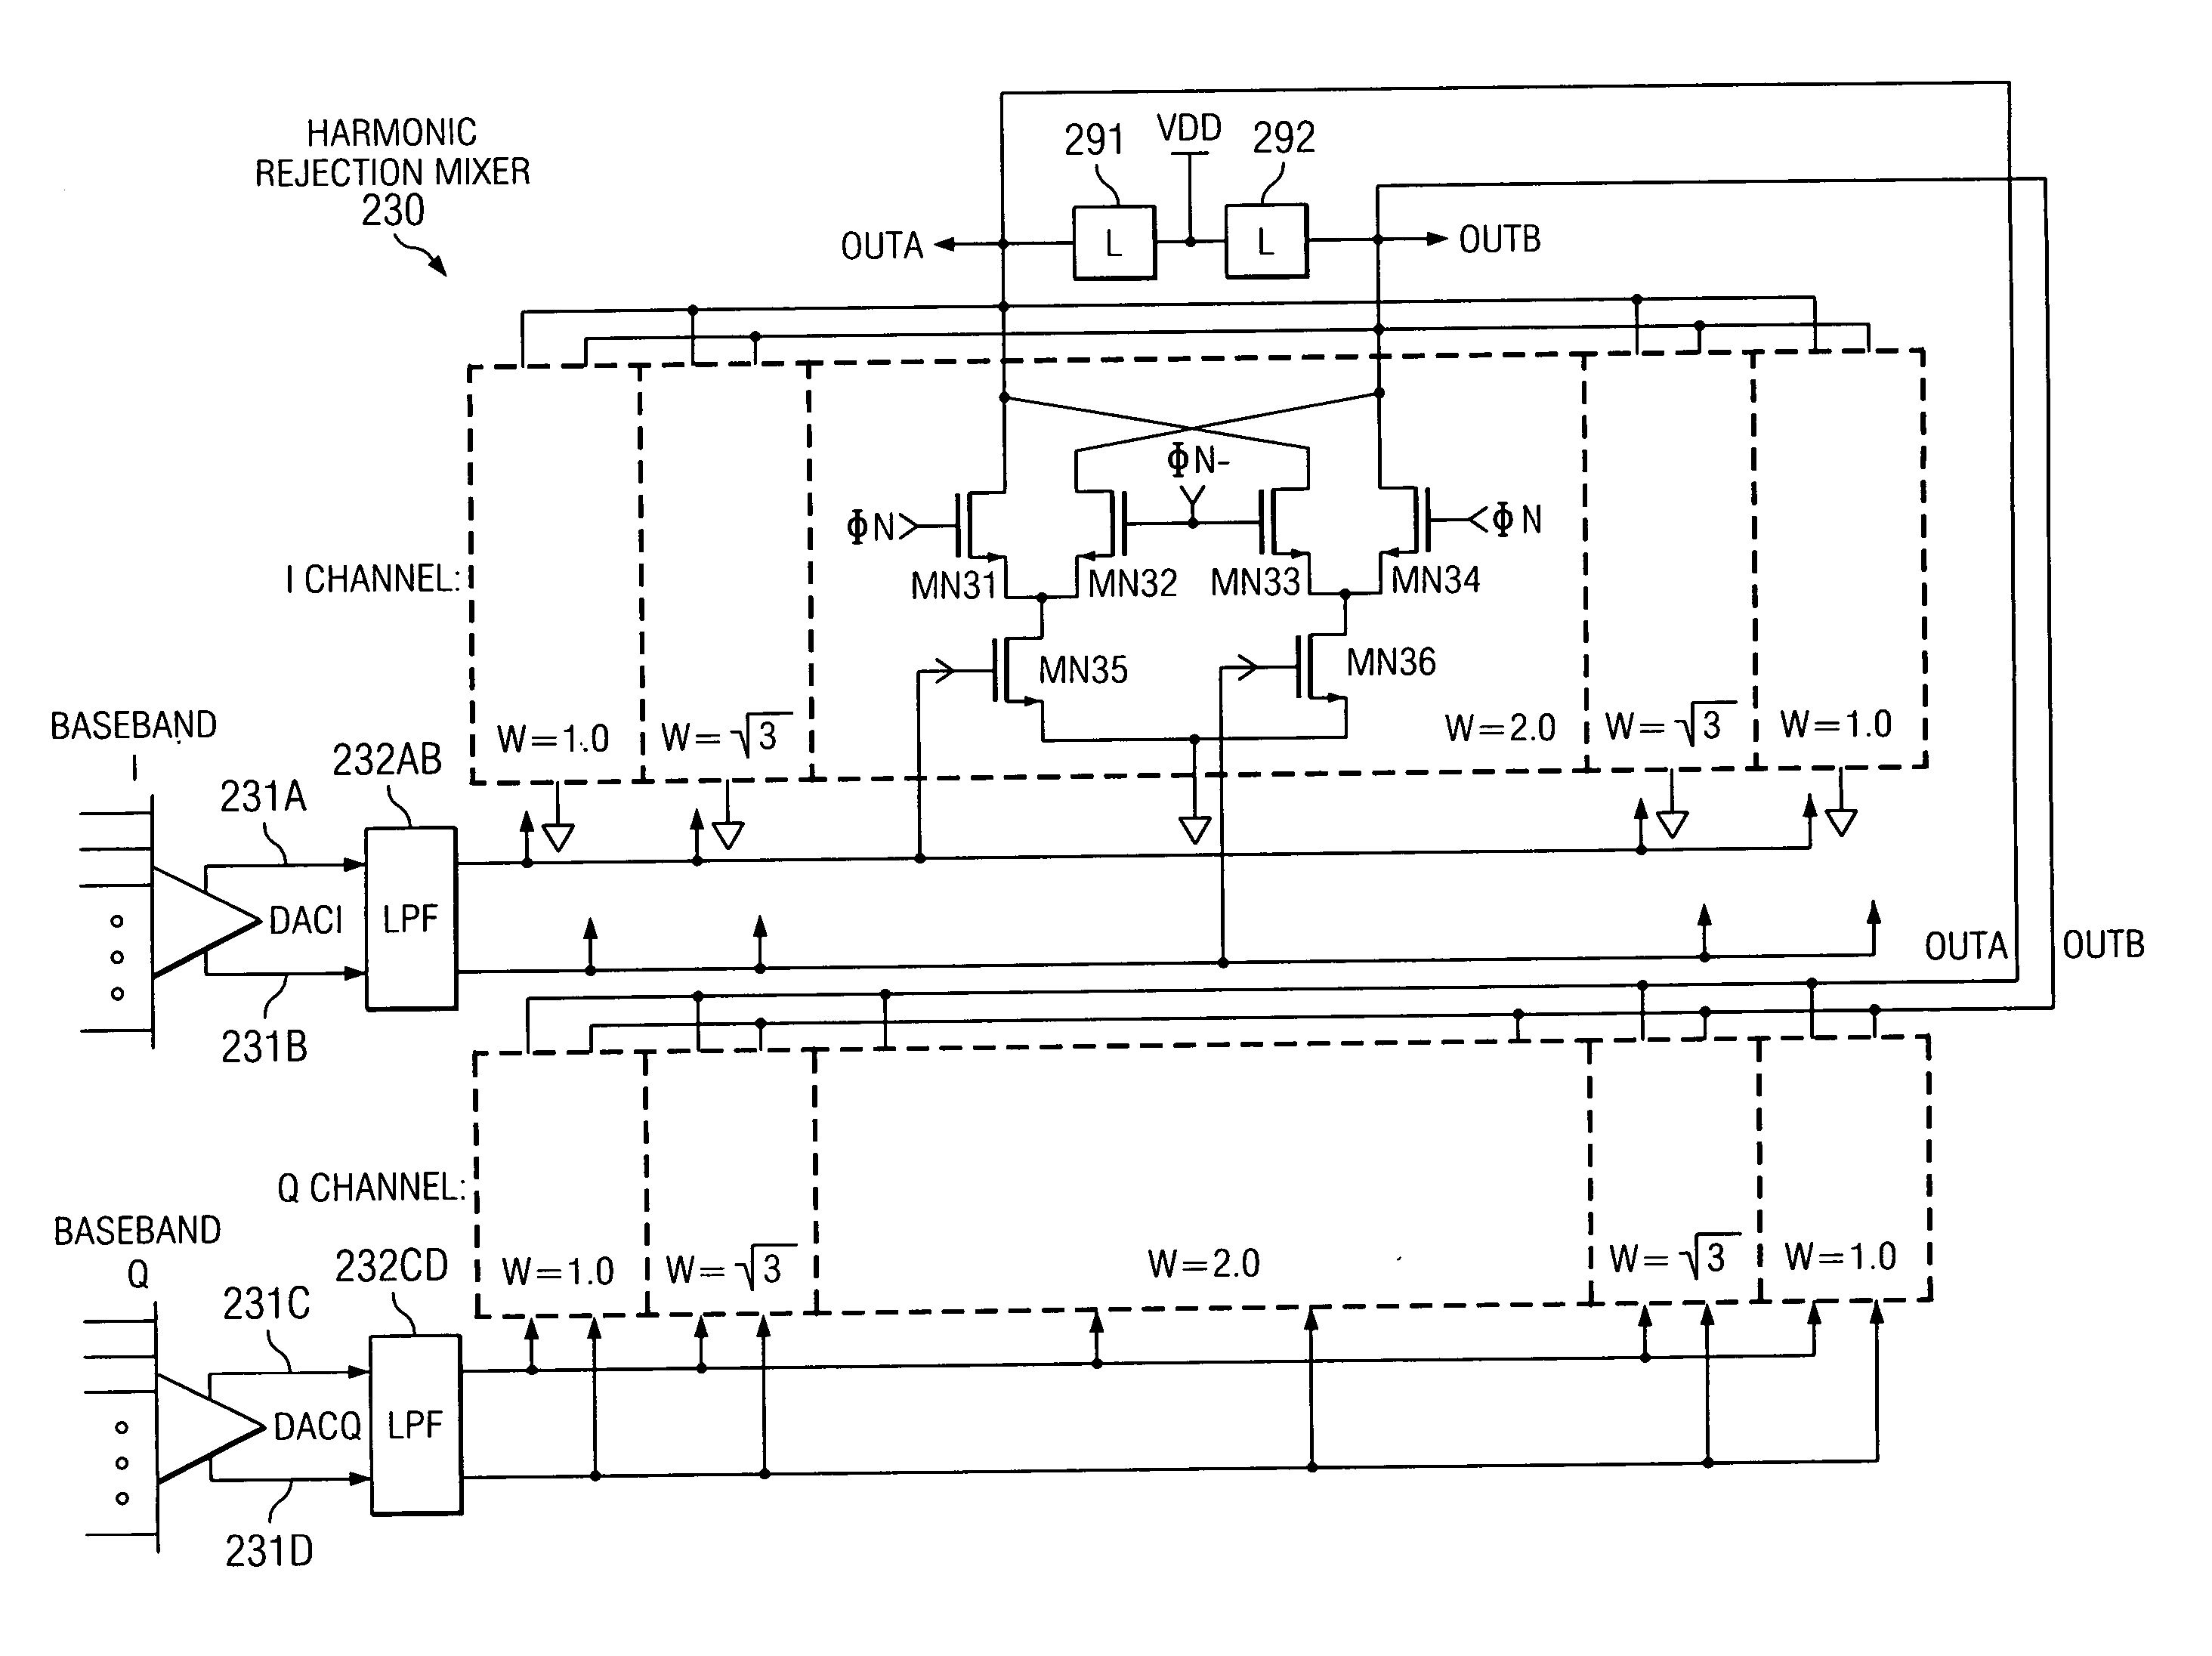 Current interpolation in multi-phase local oscillator for use with harmonic rejection mixer